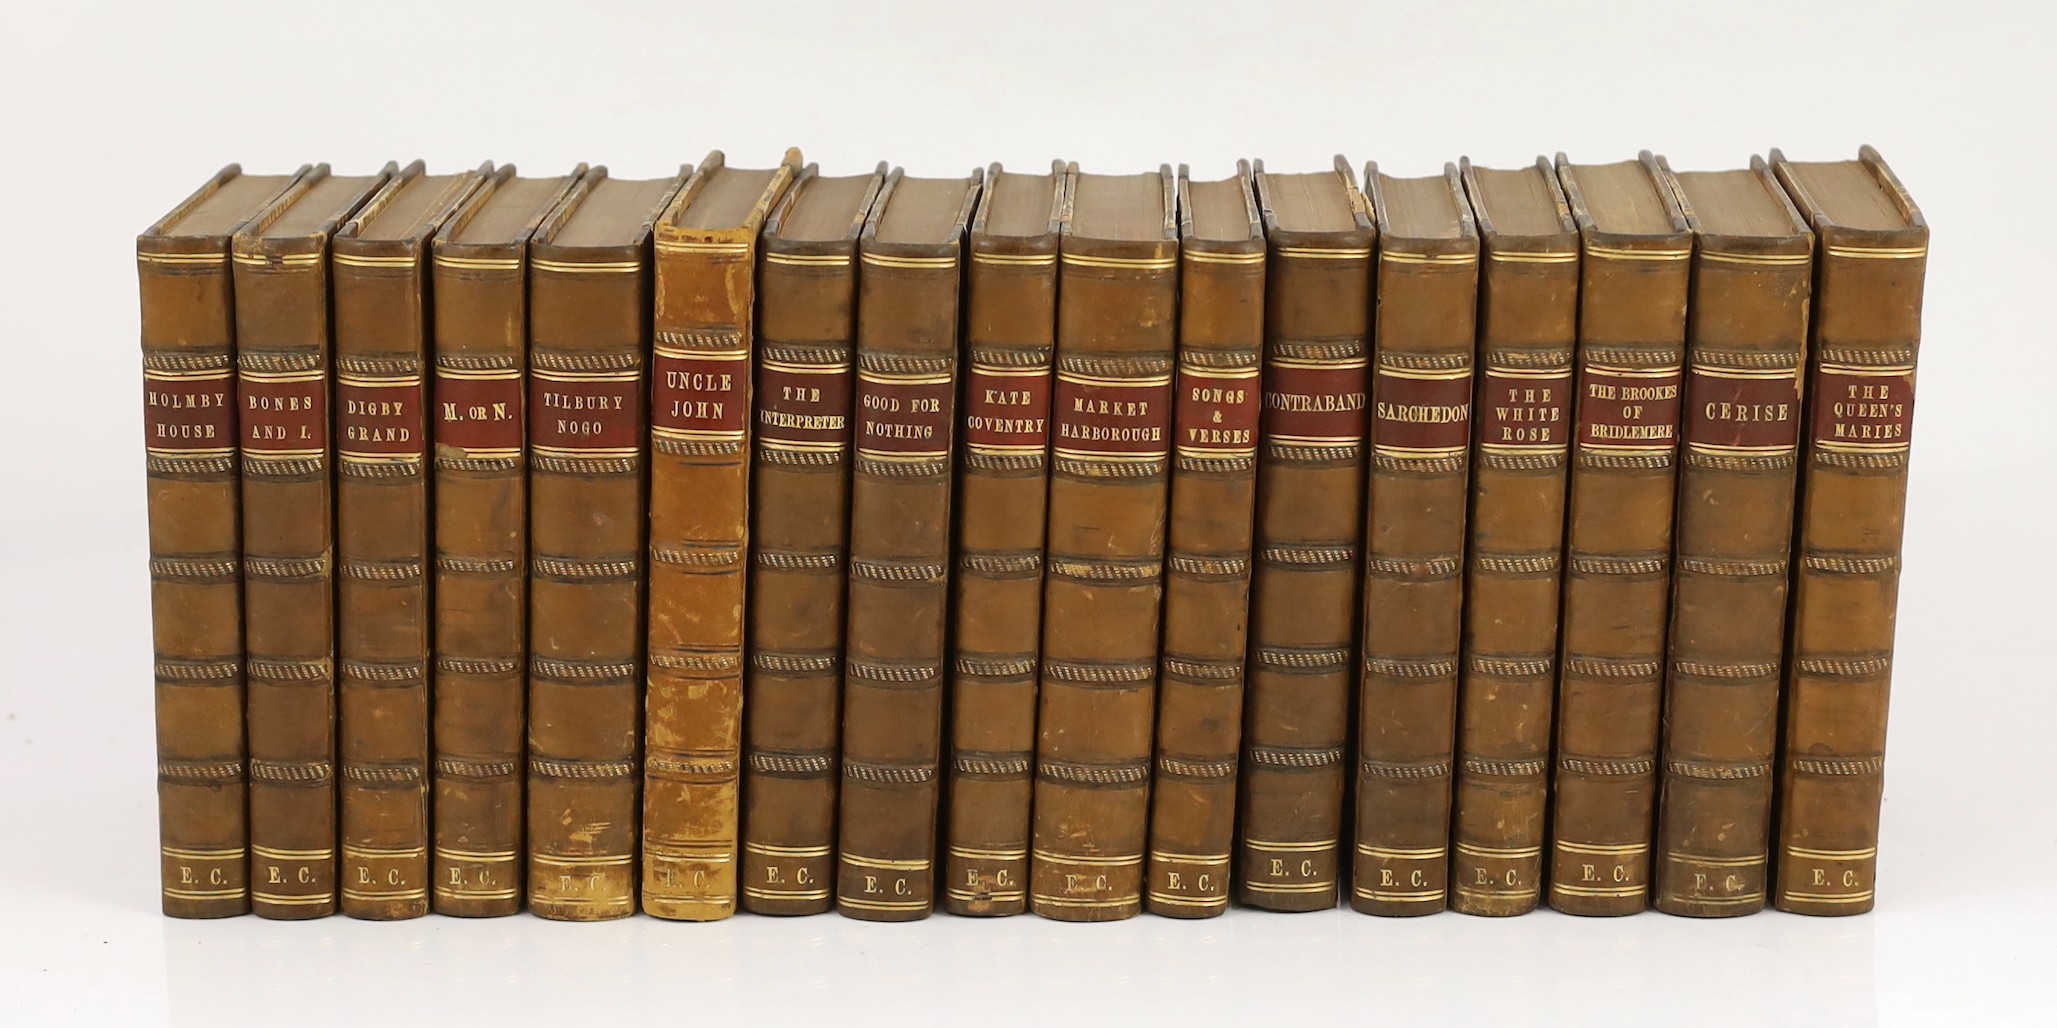 Whyte, Melville, G.J. - (Collected Novels), 17 vols. contemp. half calf and marbled boards, gilt-decorated and panelled spines with maroon labels, cr.8vo. (ca.1900)